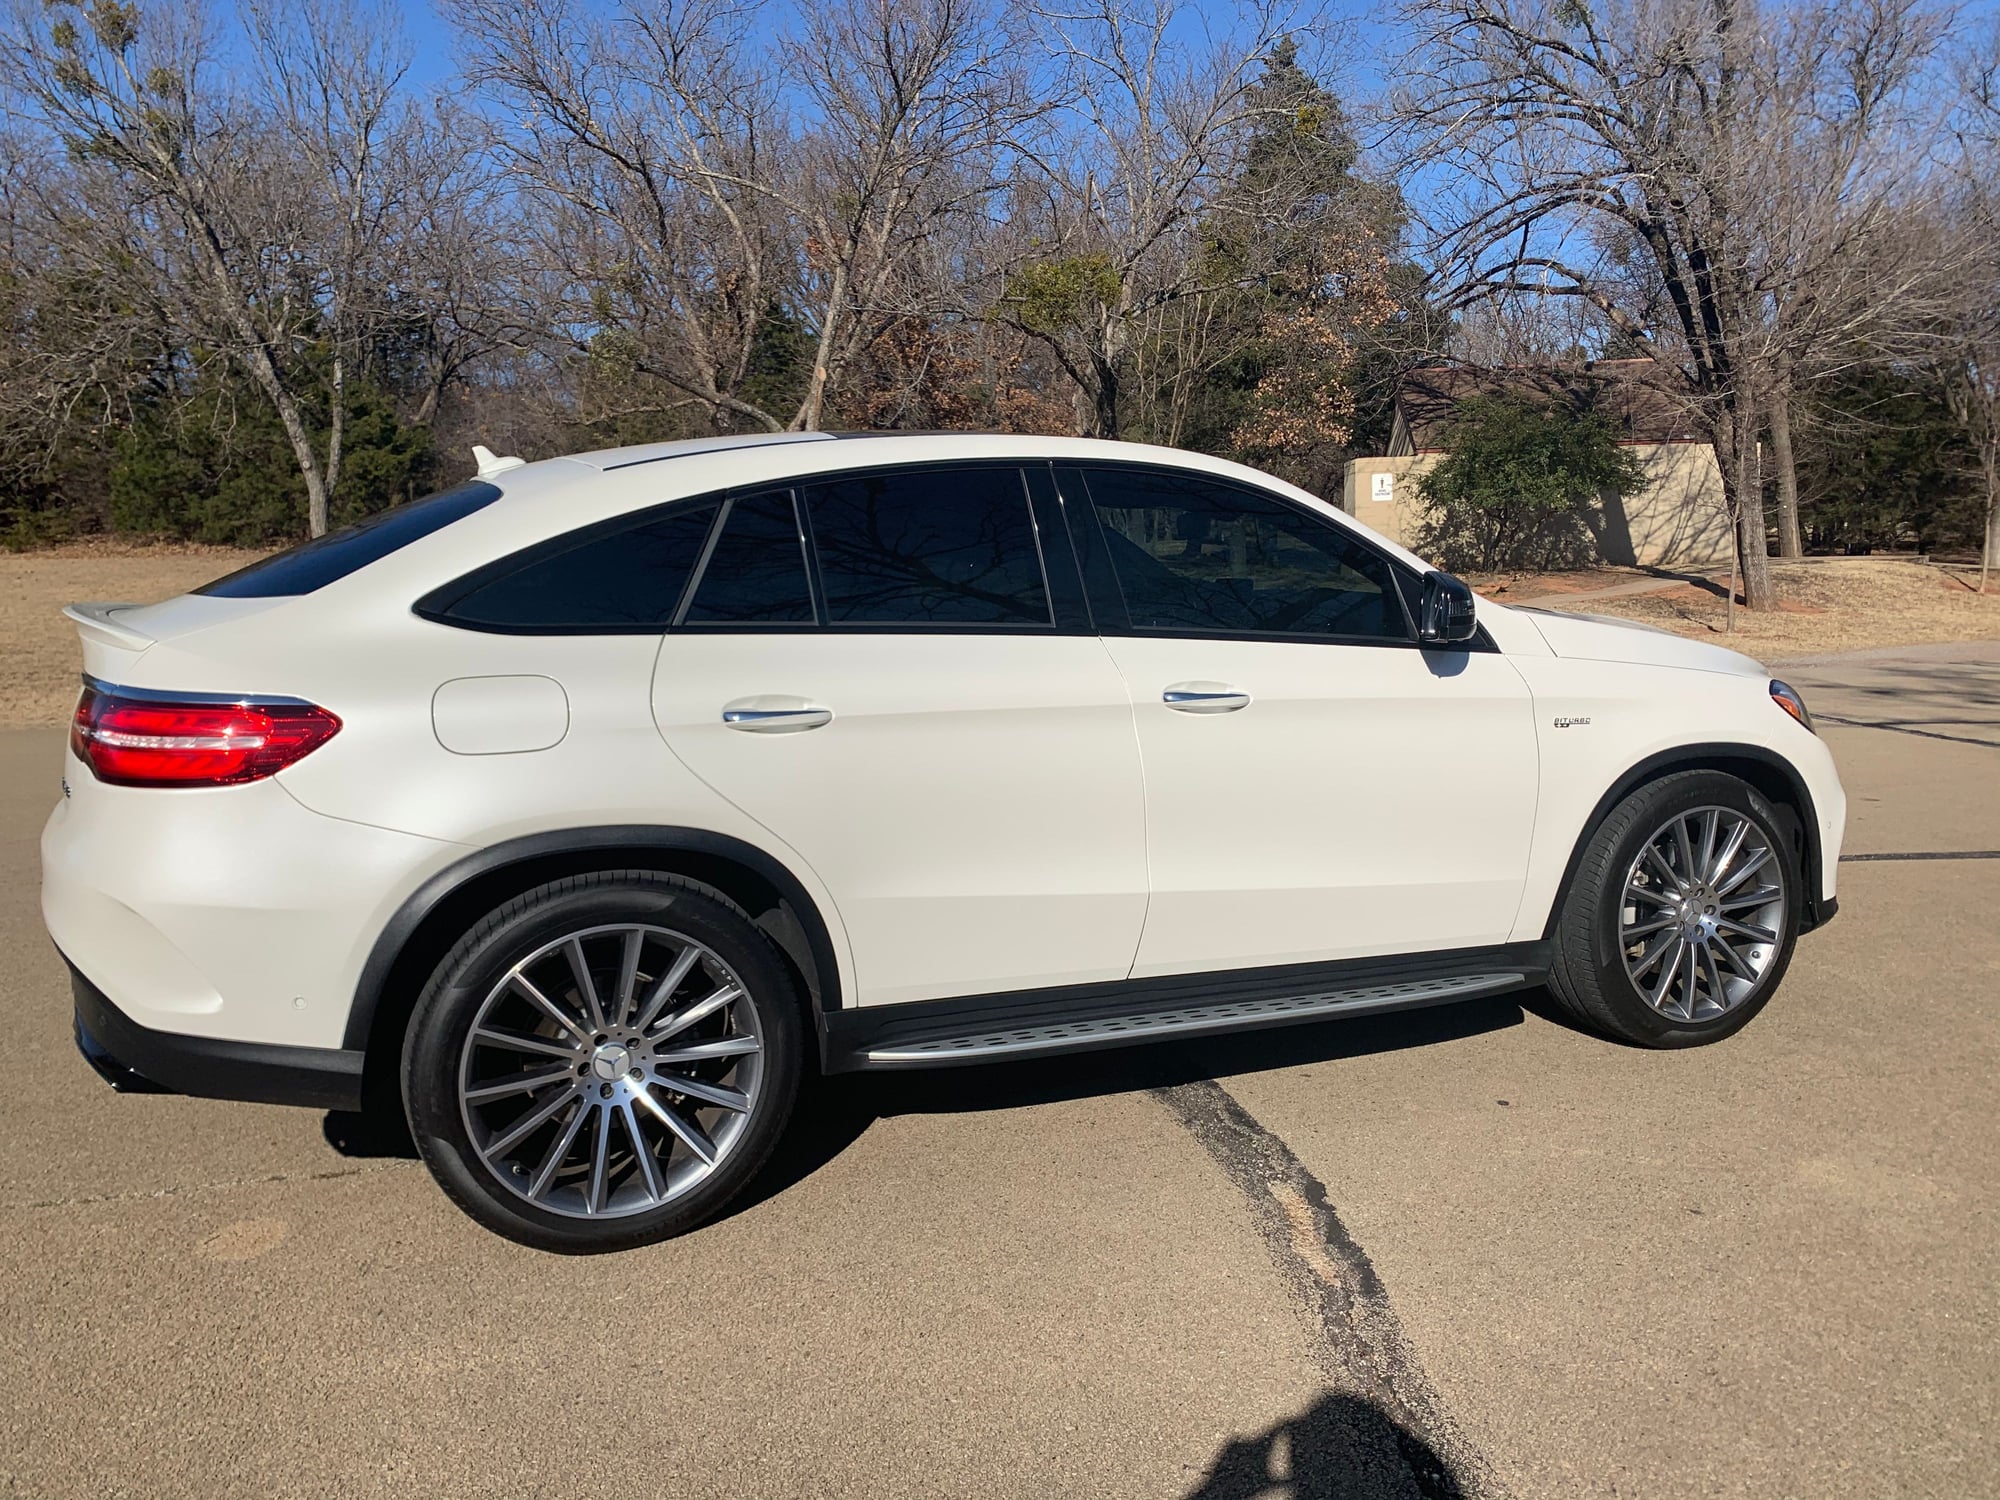 Wheels and Tires/Axles - GLE 43 Coupe 22" and 21" wheels - Used - 2017 to 2019 Mercedes-Benz GLE43 AMG - Edmond, OK 73013, United States